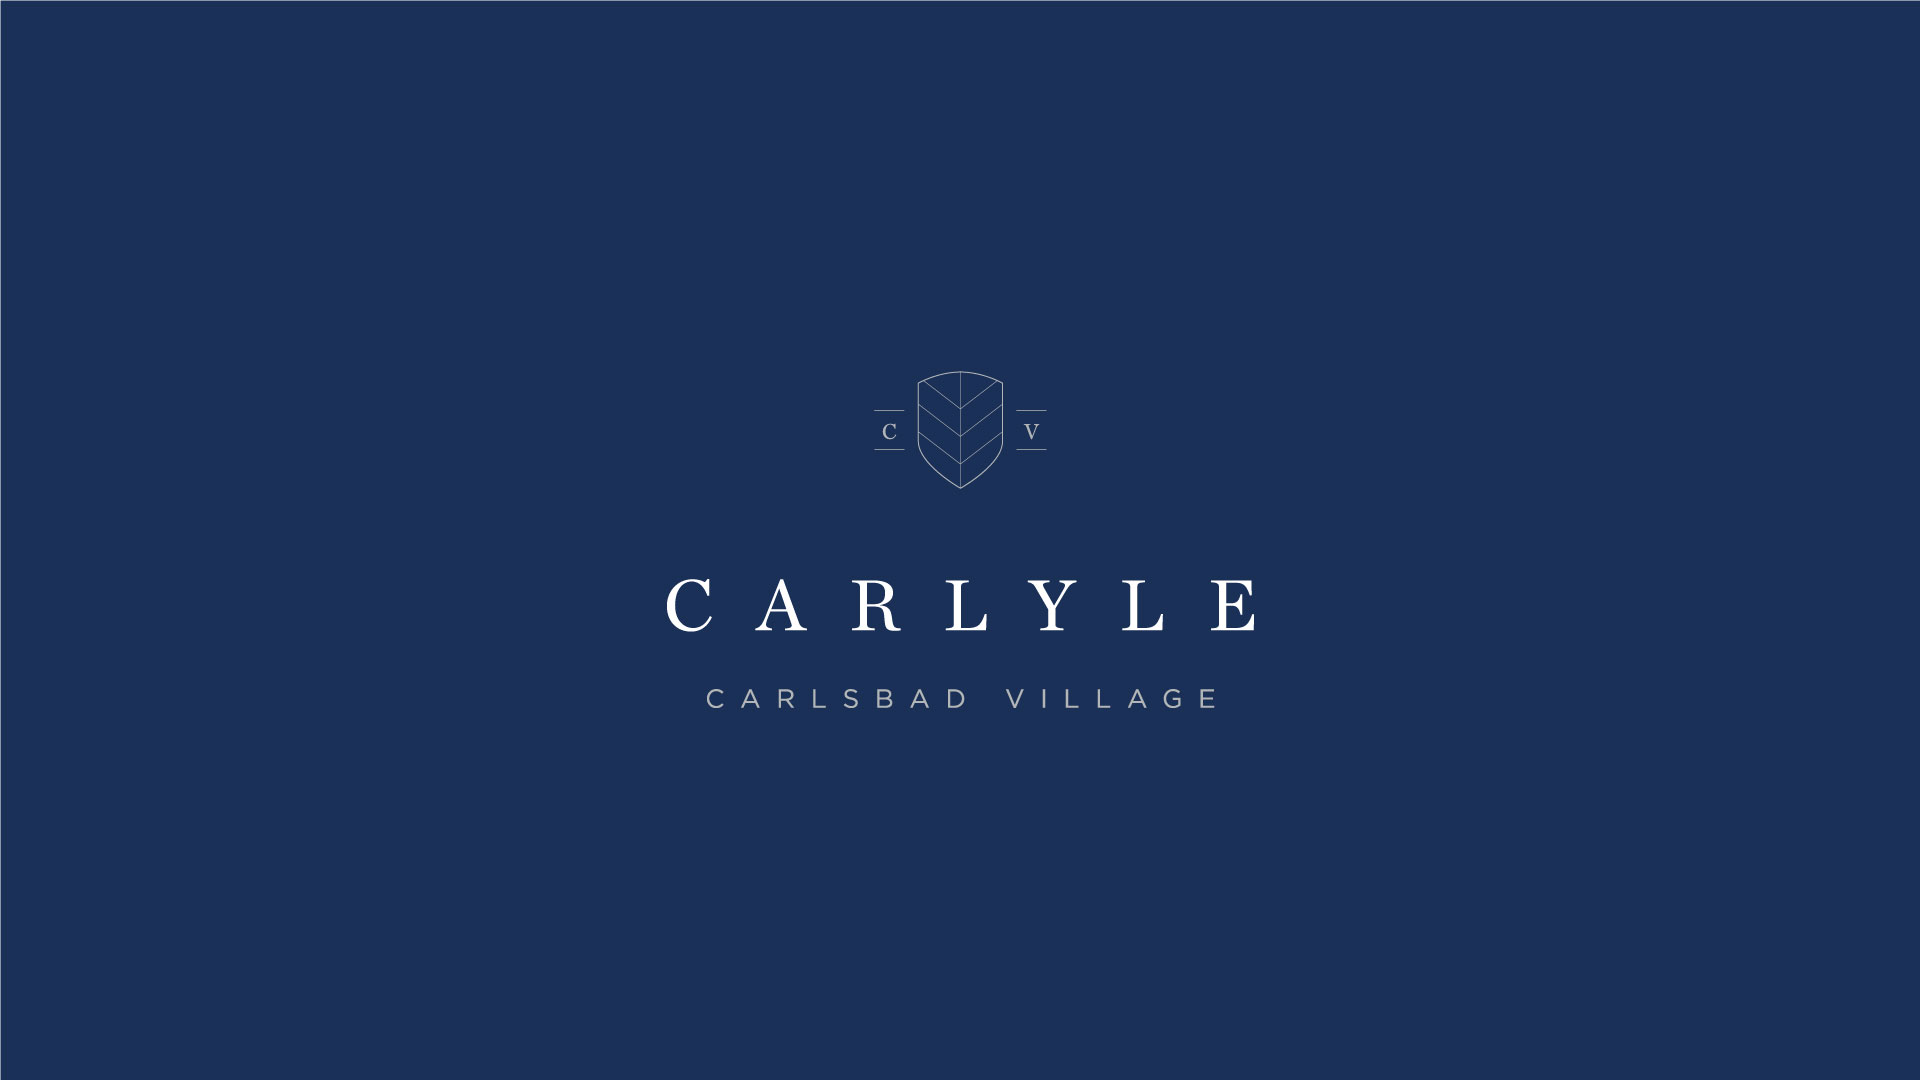 Carlyle Carlsbad Village graphic with white text and dark blue background